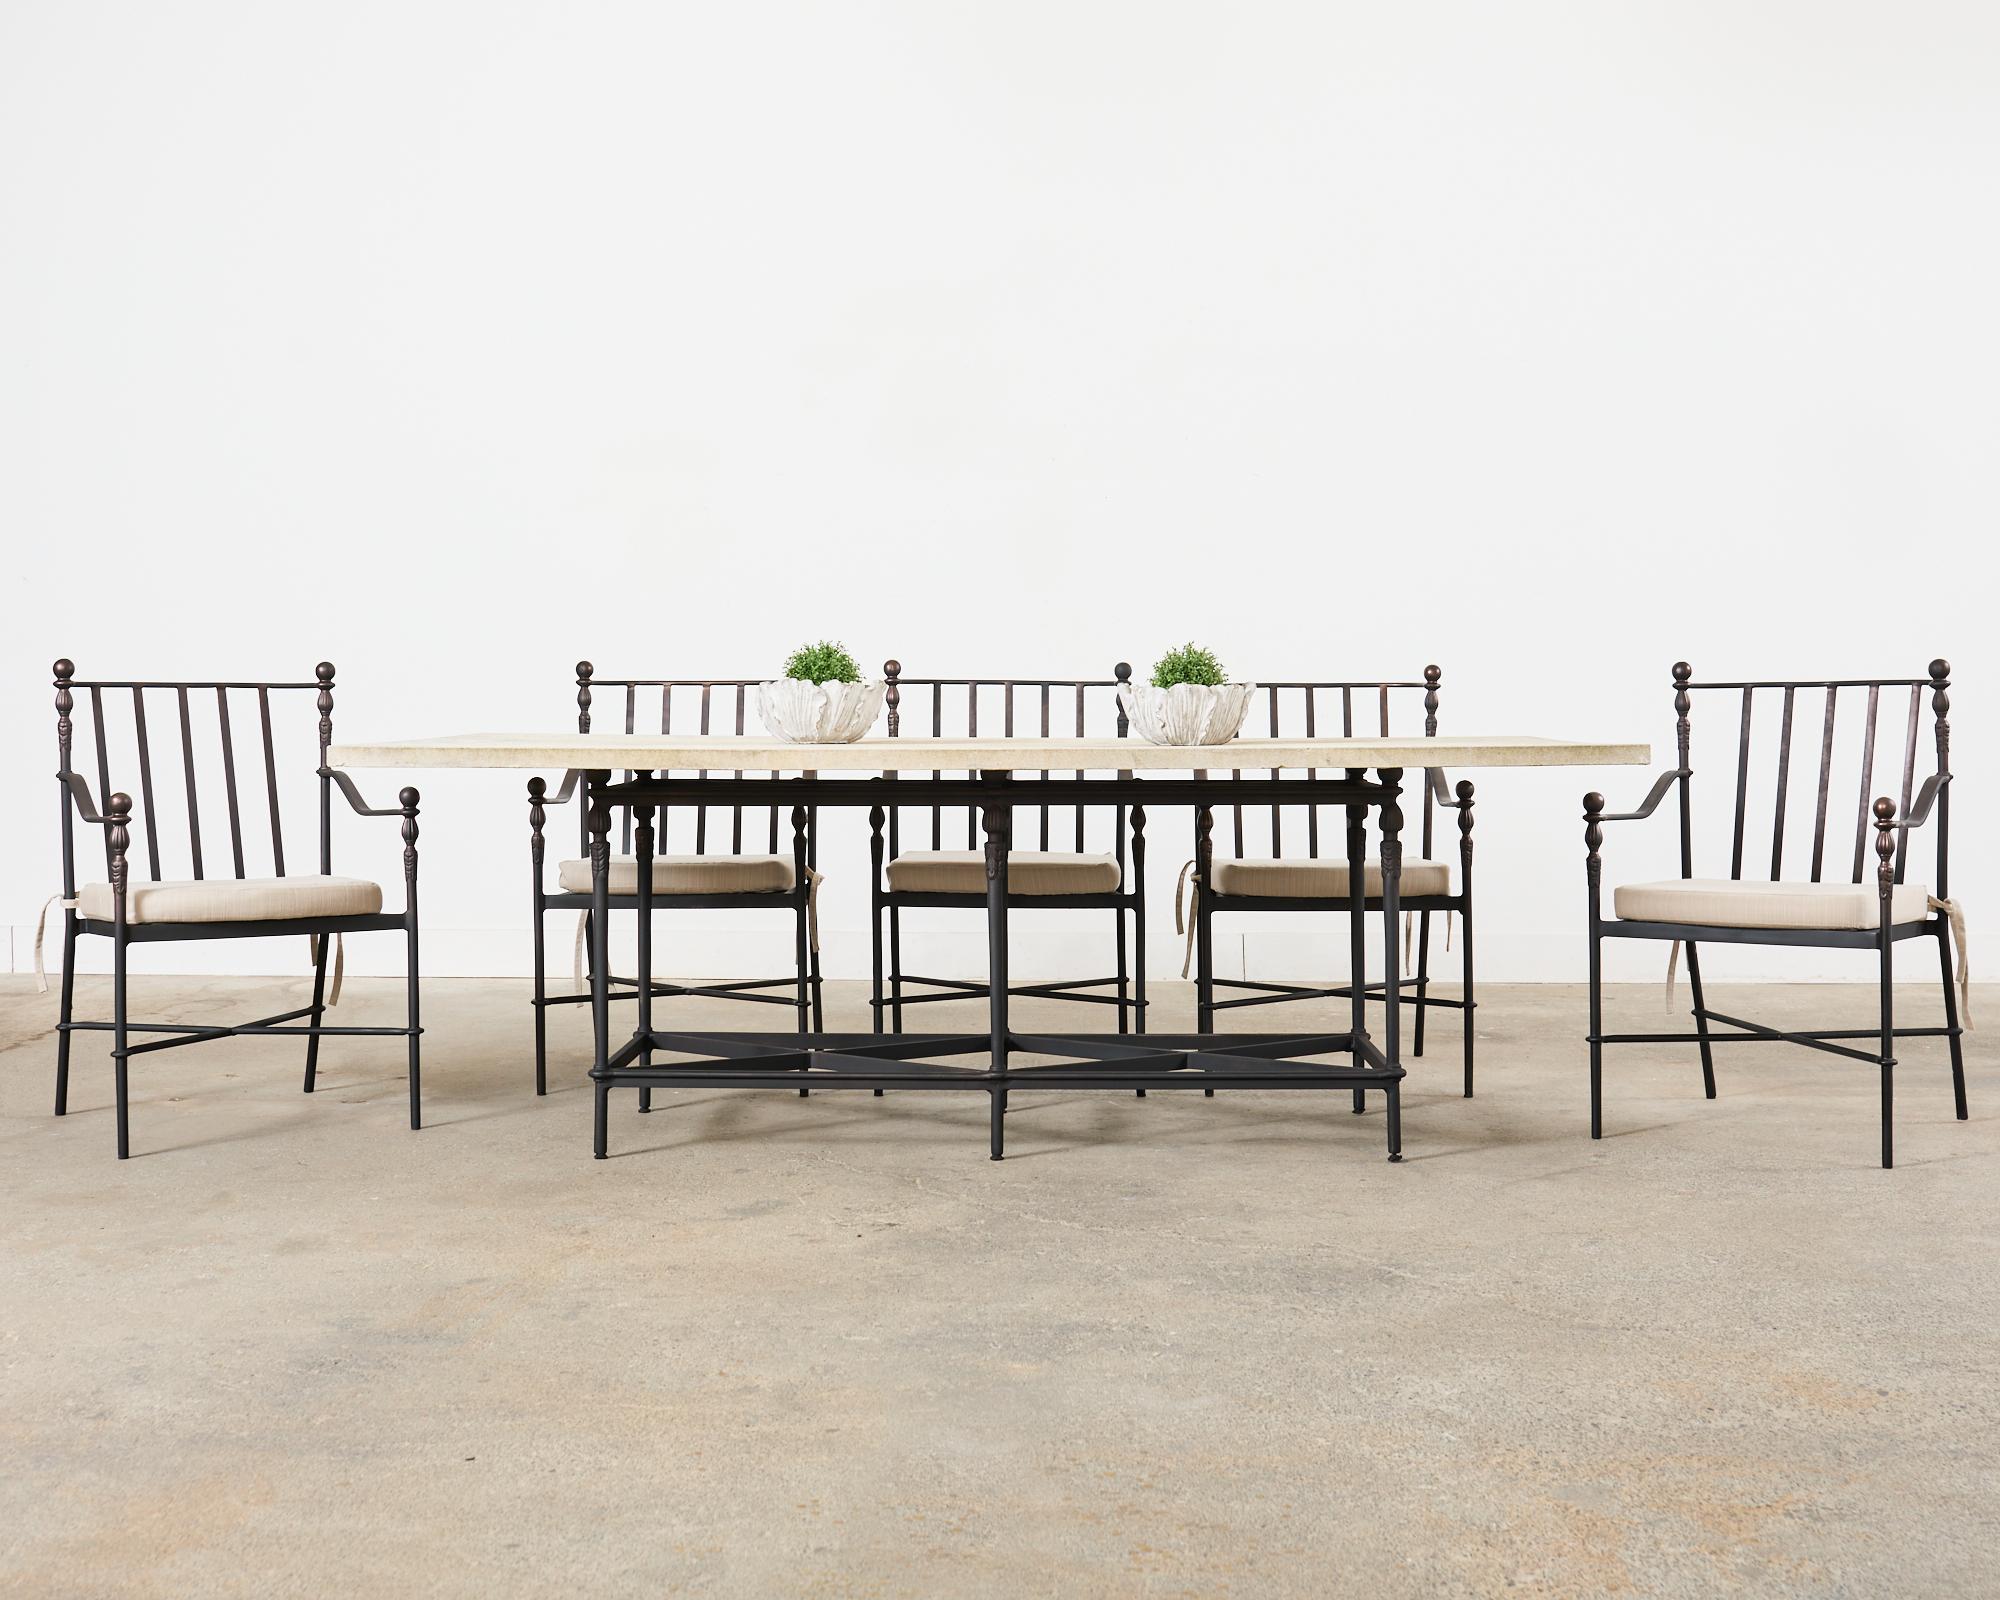 Rare set of eight Montecito cast aluminum patio and garden dining armchairs designed by Michael Taylor. The set consists of all armchairs (Model #MTD-1078) with a matte finish having subtle bronze accents. The iconic chairs have smooth ball finials